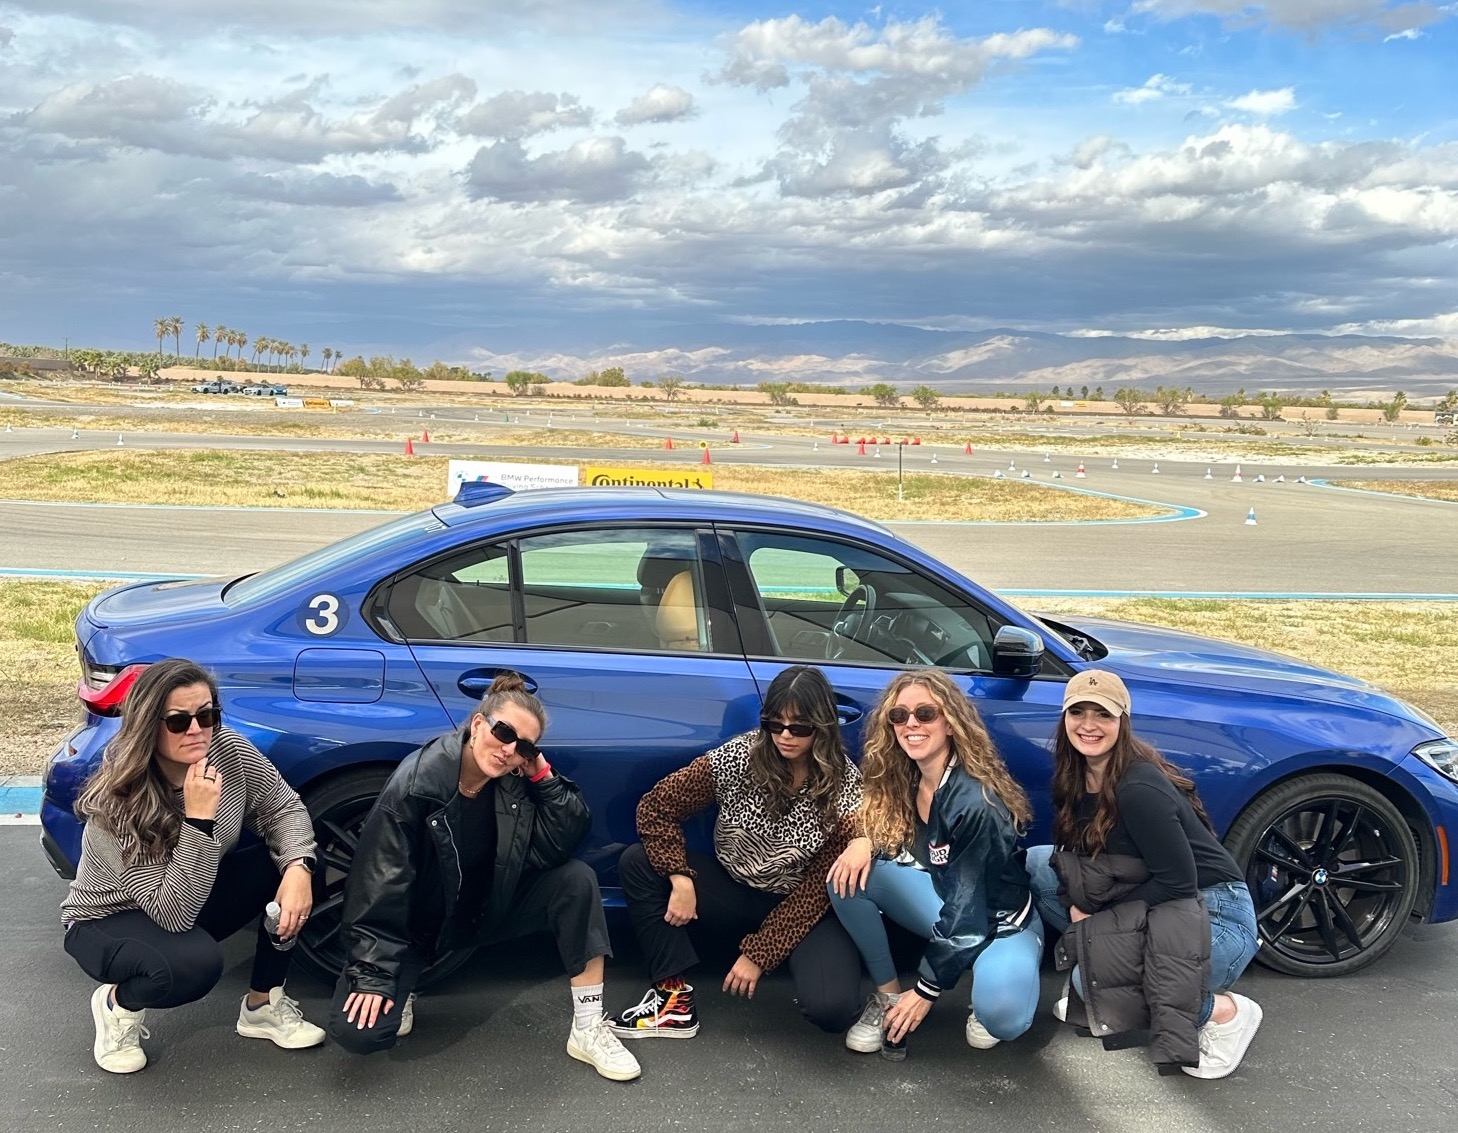 The women of Buildr right before breaking the sound barrier on the track behind them.